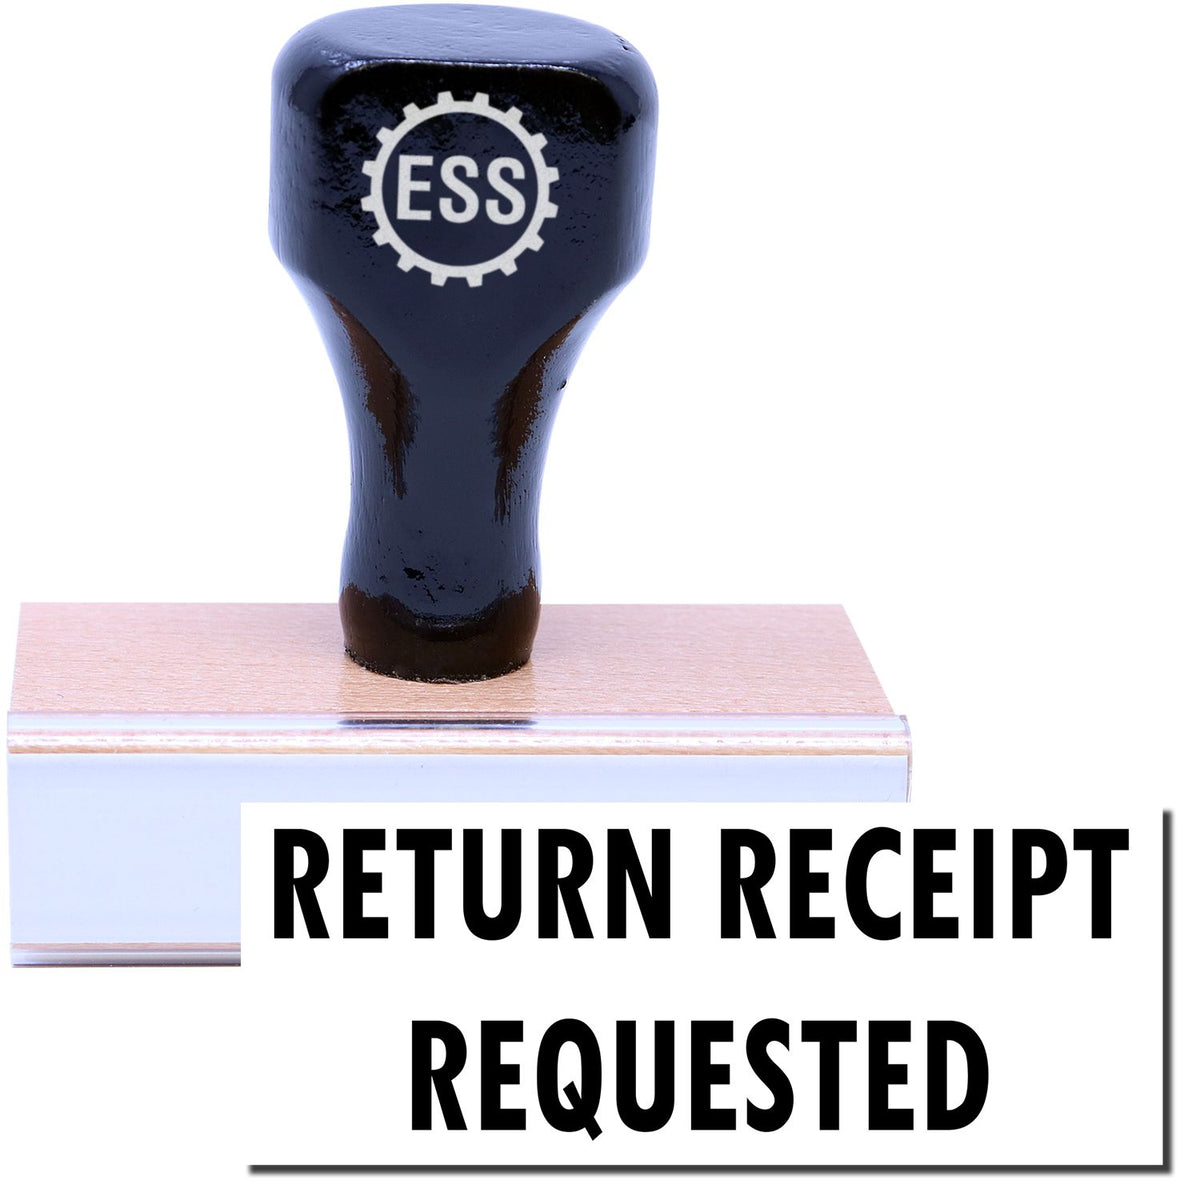 A stock office rubber stamp with a stamped image showing how the text &quot;RETURN RECEIPT REQUESTED&quot; in a large font is displayed after stamping.